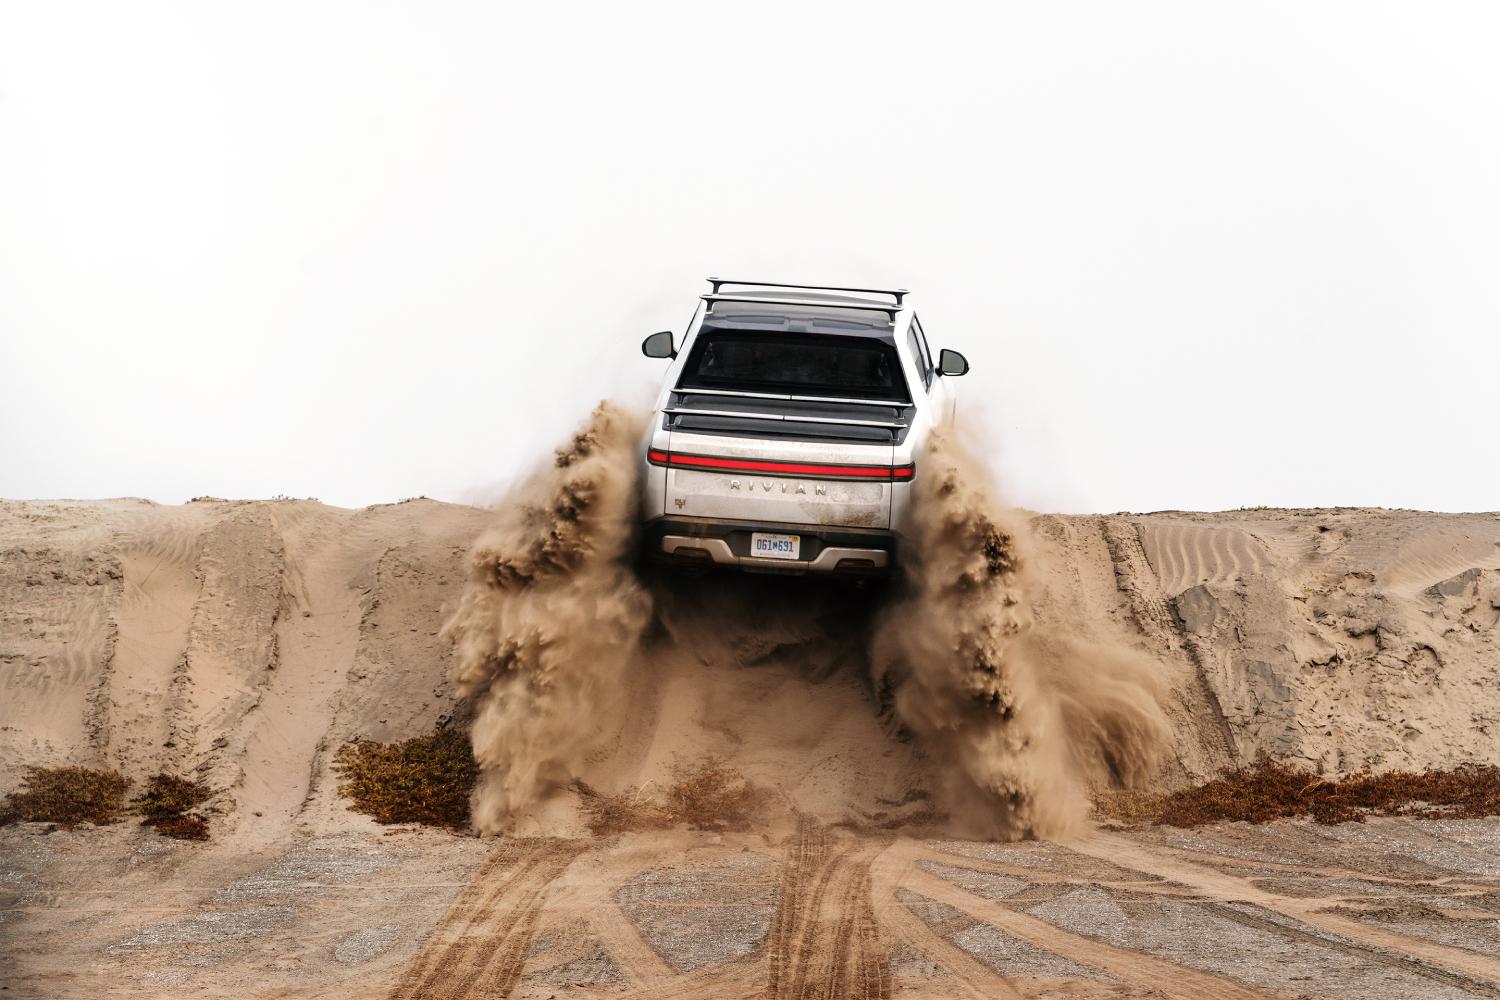 Rivian is making their presence known and showing that they are a fierce competitor in the EV race.